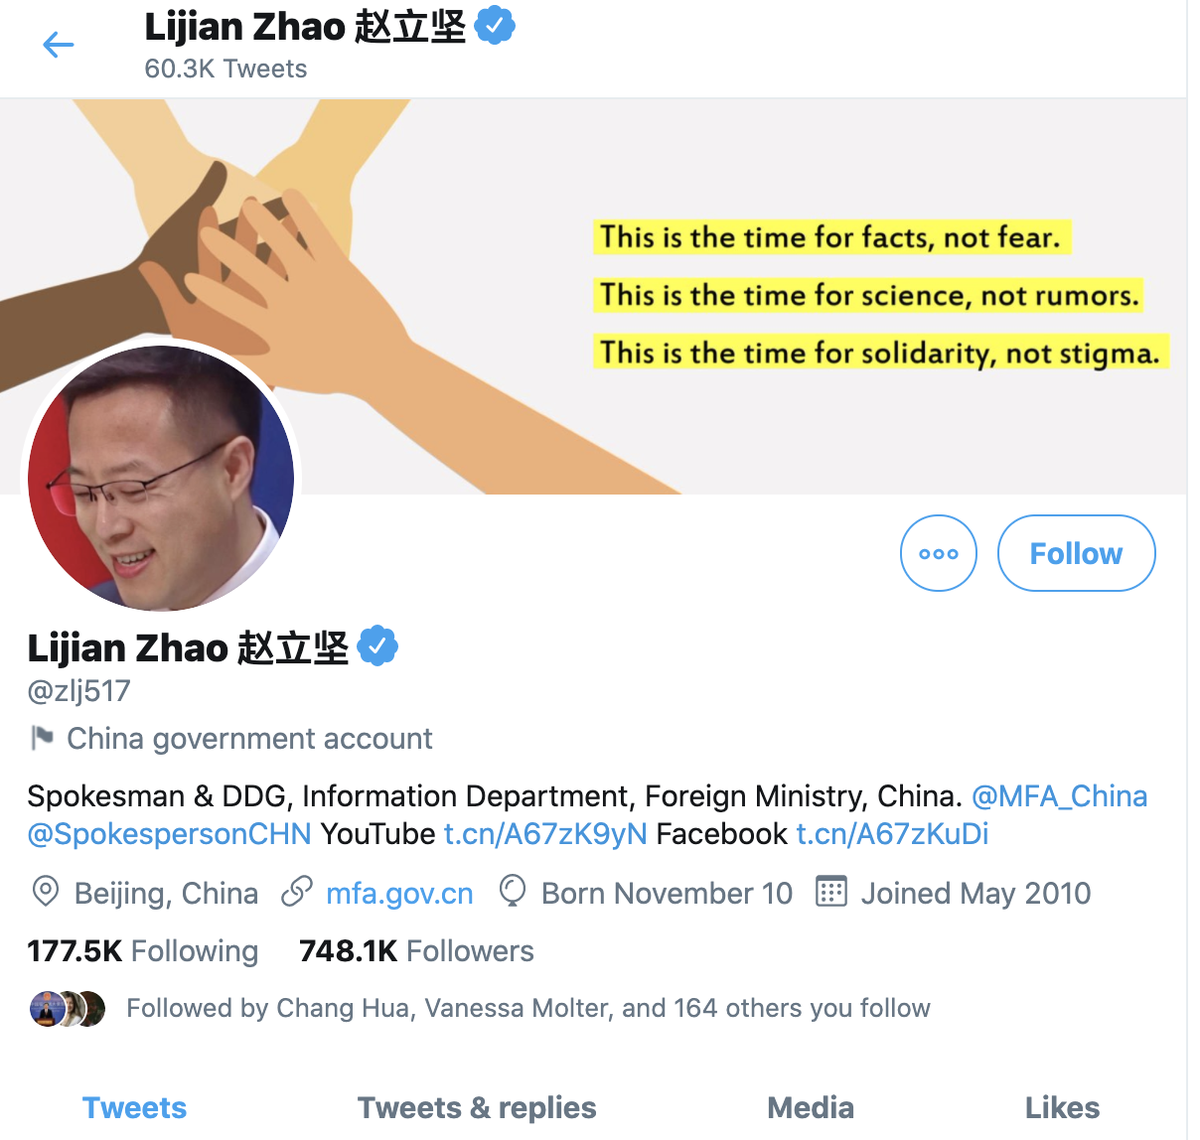 The Chinese foreign ministry and one of its somewhat controversial spokespeople Zhao Lijian have been labelled. And two more well-known Chinese media outlets,  @CCTV and  @CGTNOfficial, have also got "state-affiliated media" labels